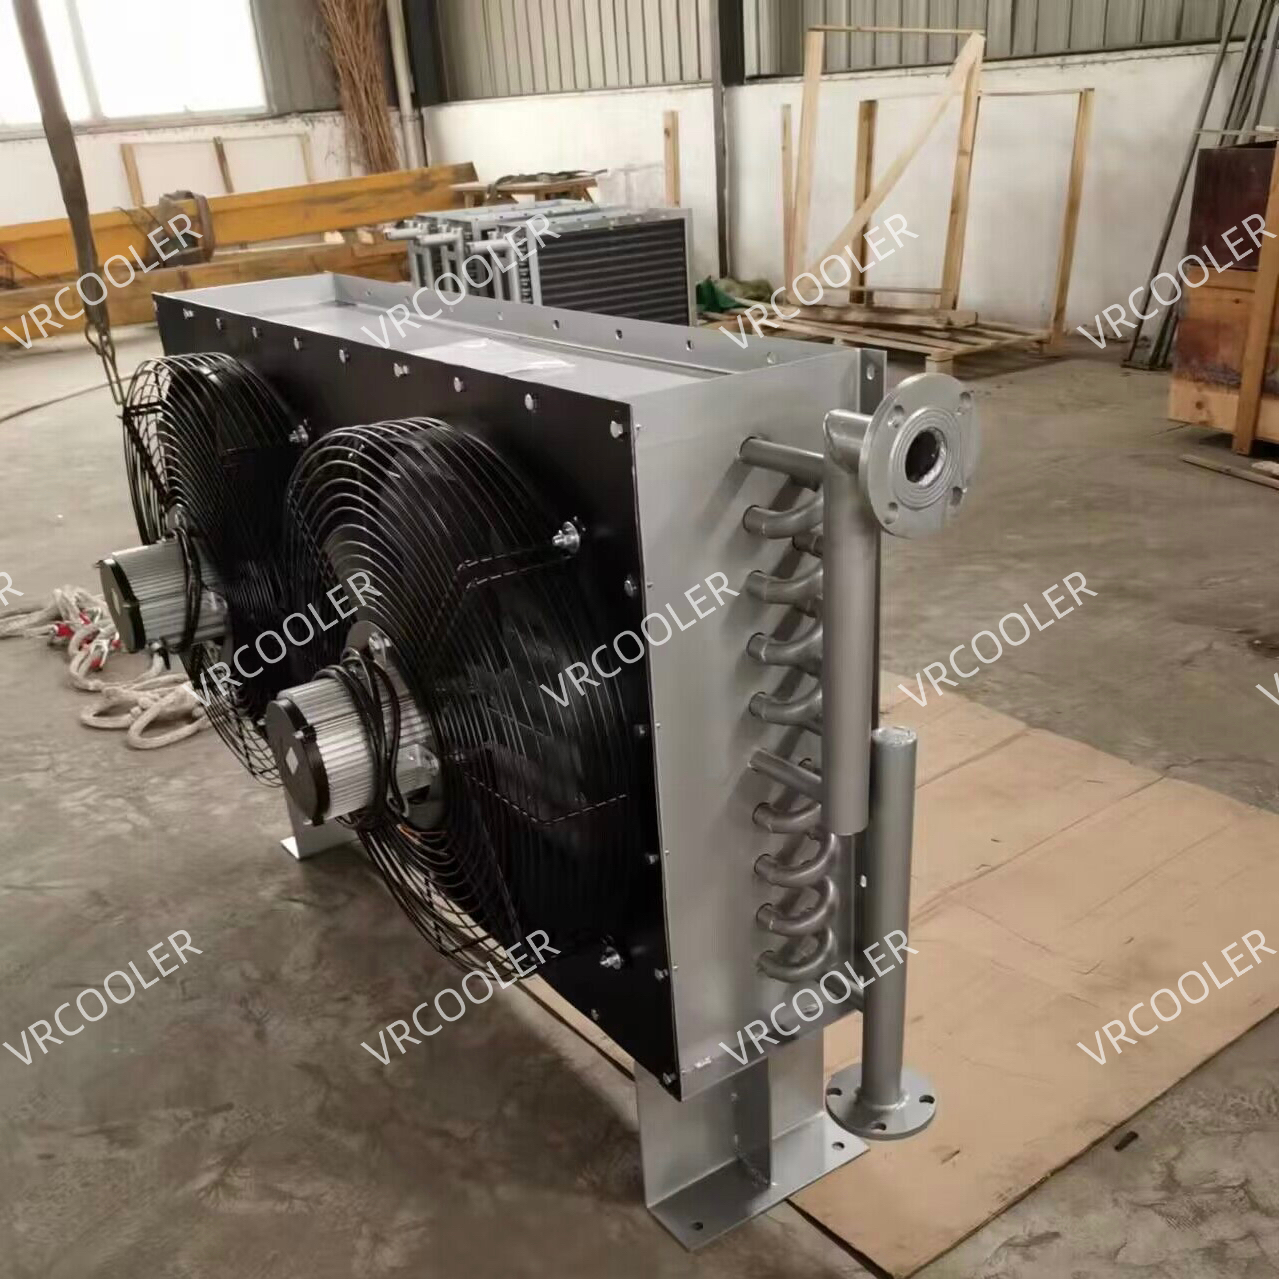 VRCOOLERTECH CST customized a finned tube drying room heater for a New Zealand customer